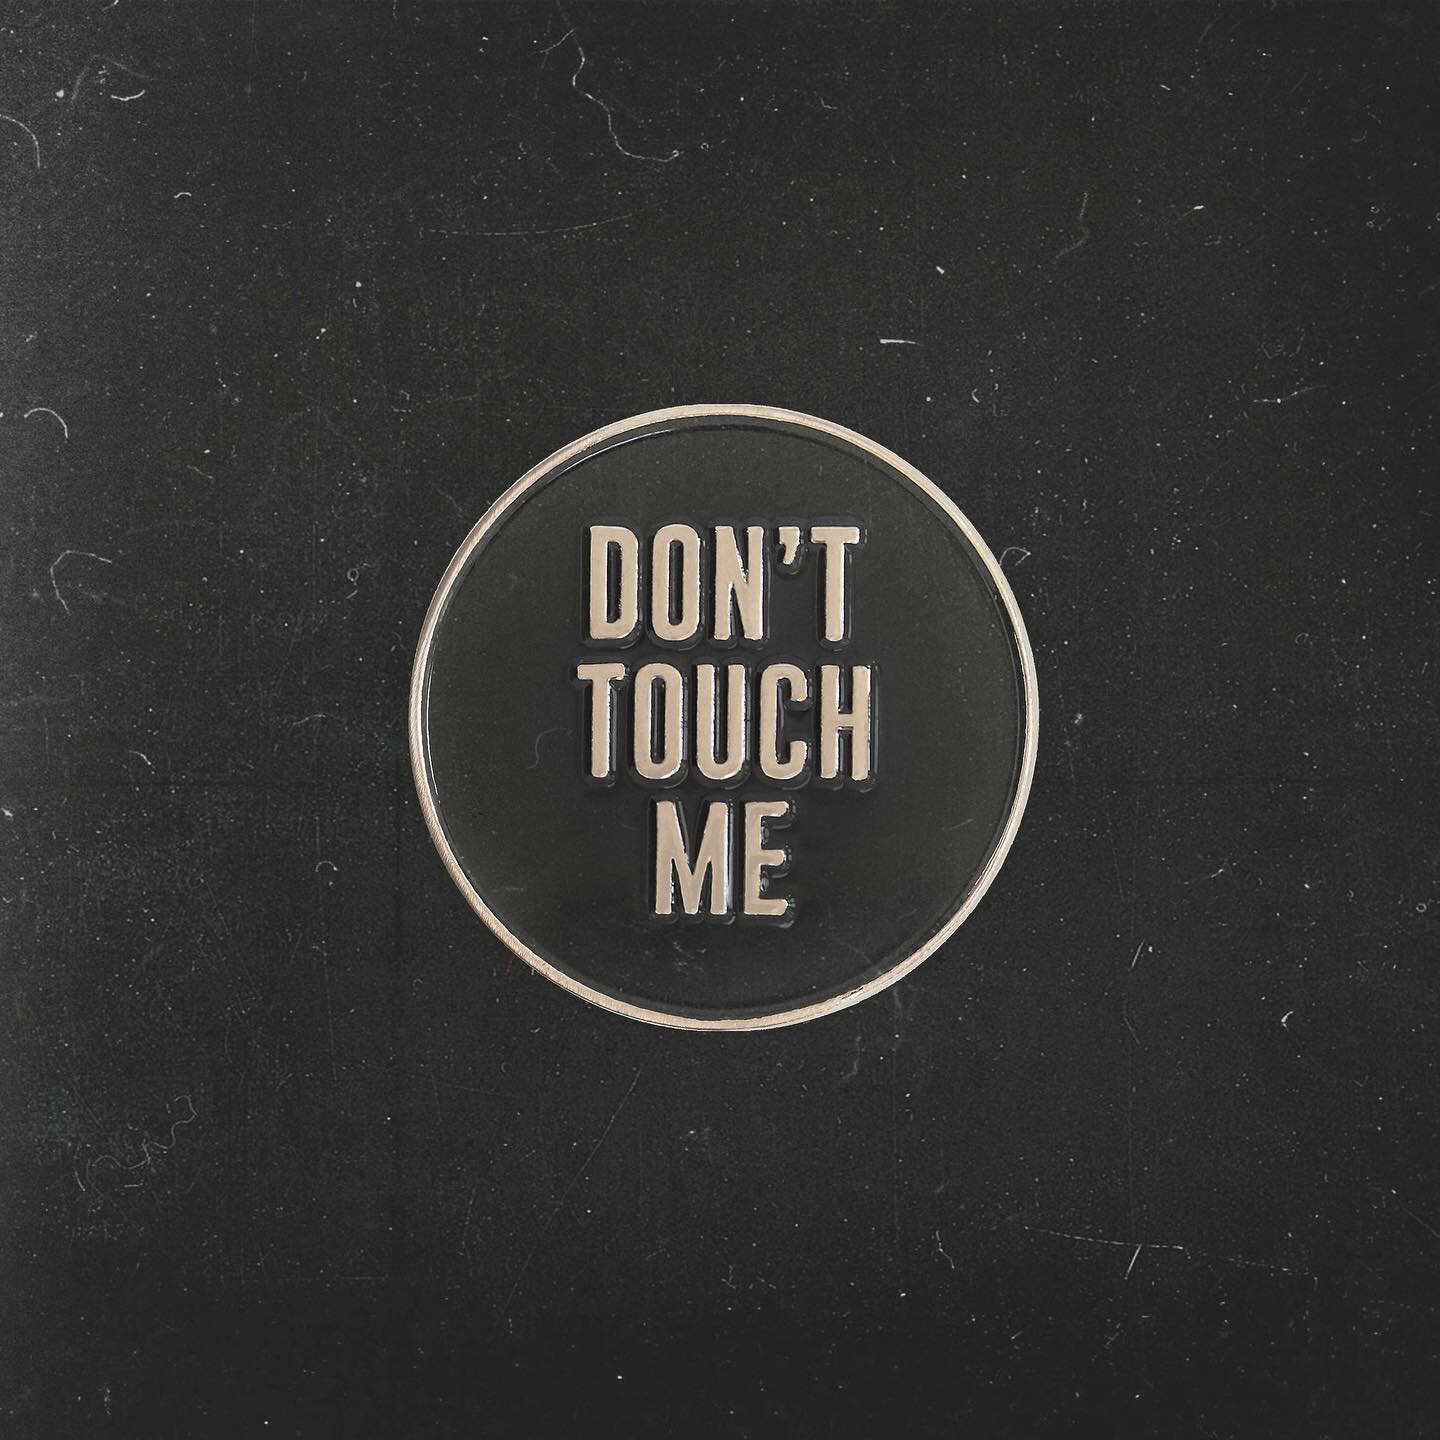 Told ya so.
Don&rsquo;t even fucking breathe near me.
1&rdquo; DON&rsquo;T TOUCH ME pin. Instock now.
-
www.deathpatches.com
#deathpatches #donttouchme #socialdistancing #ineverlikedyouanyway #selfisolatingforyears